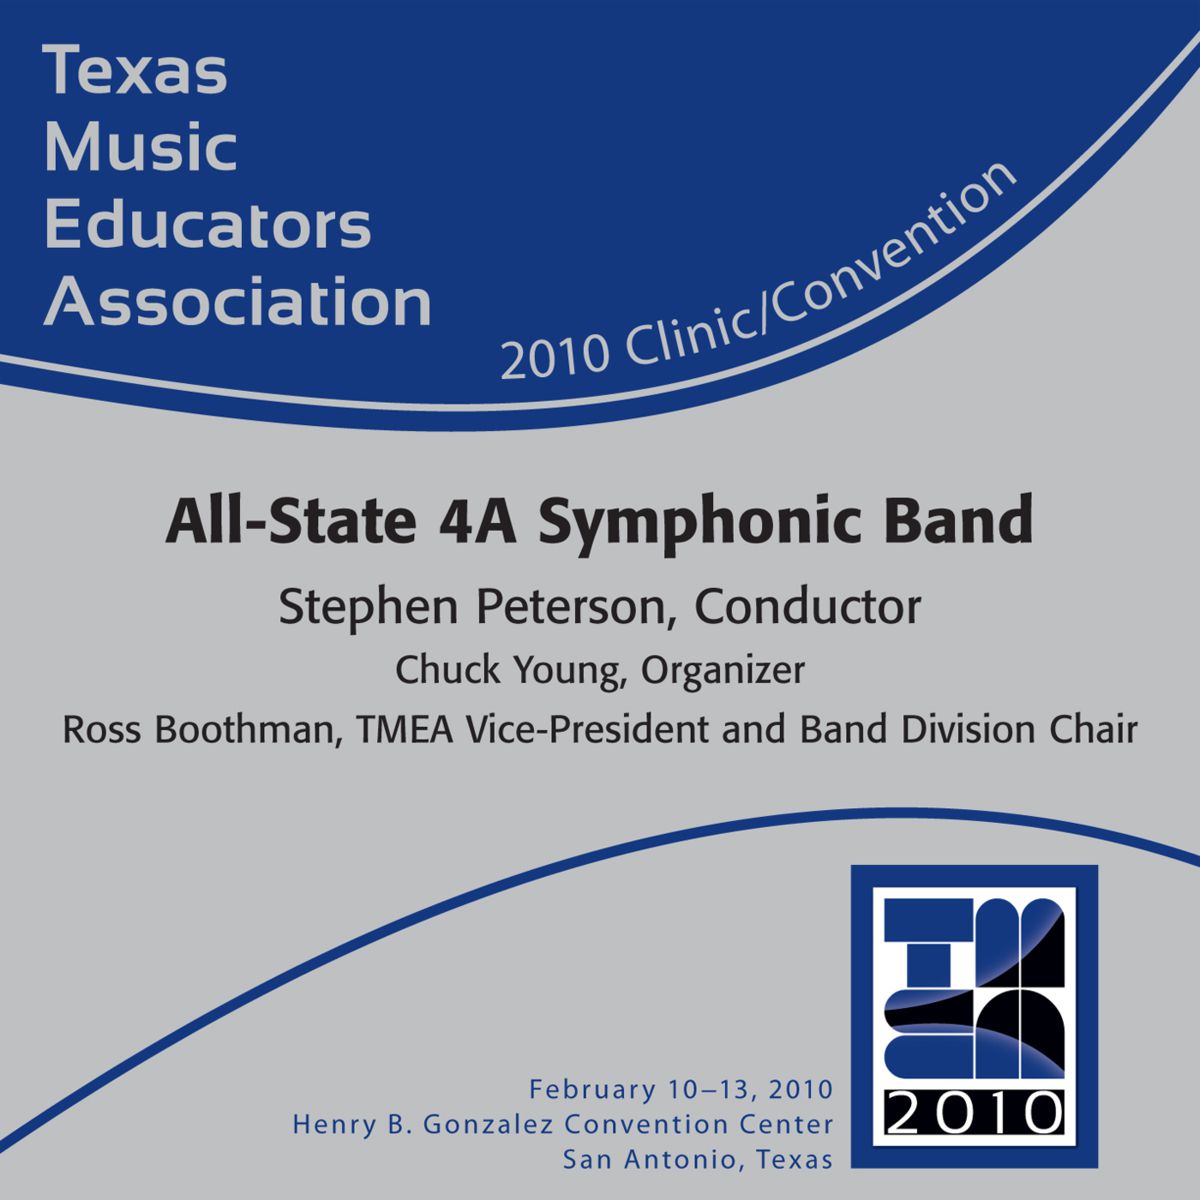 2010 Texas Music Educators Association: All-State 4A Symphonic Band - cliccare qui